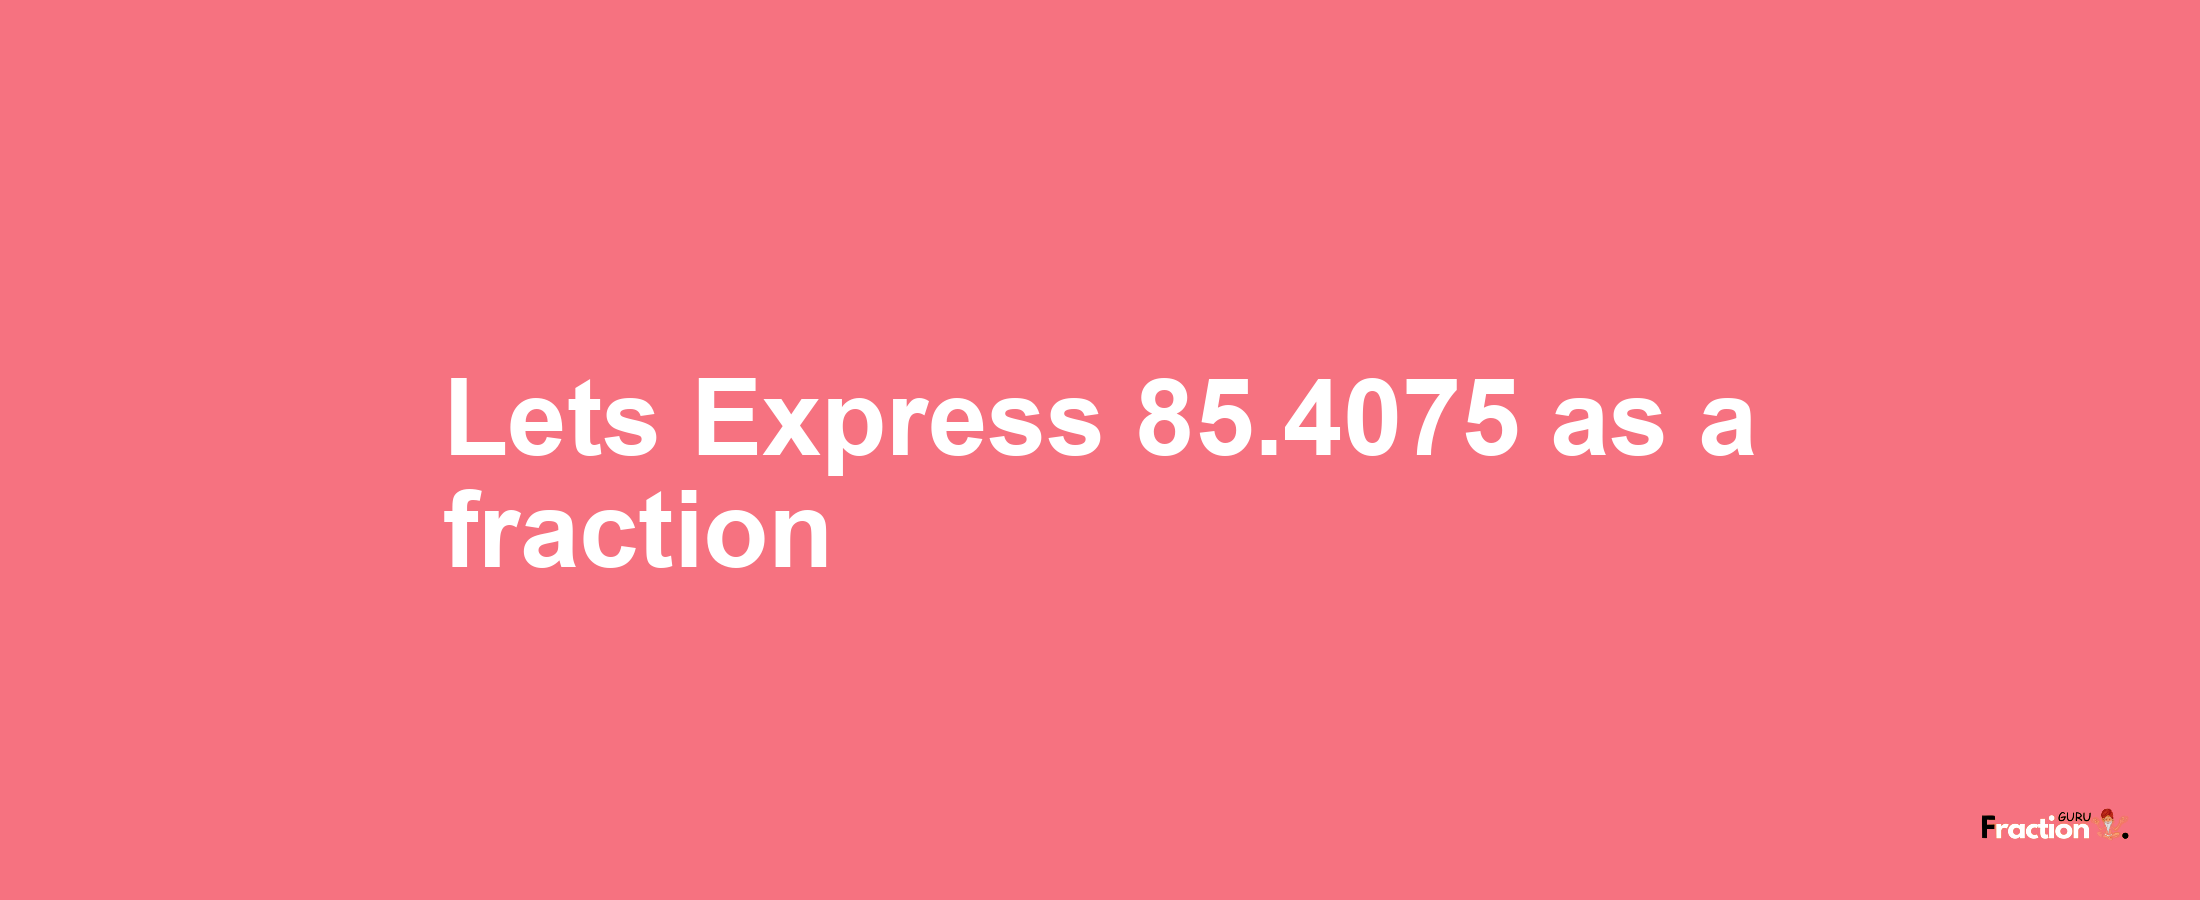 Lets Express 85.4075 as afraction